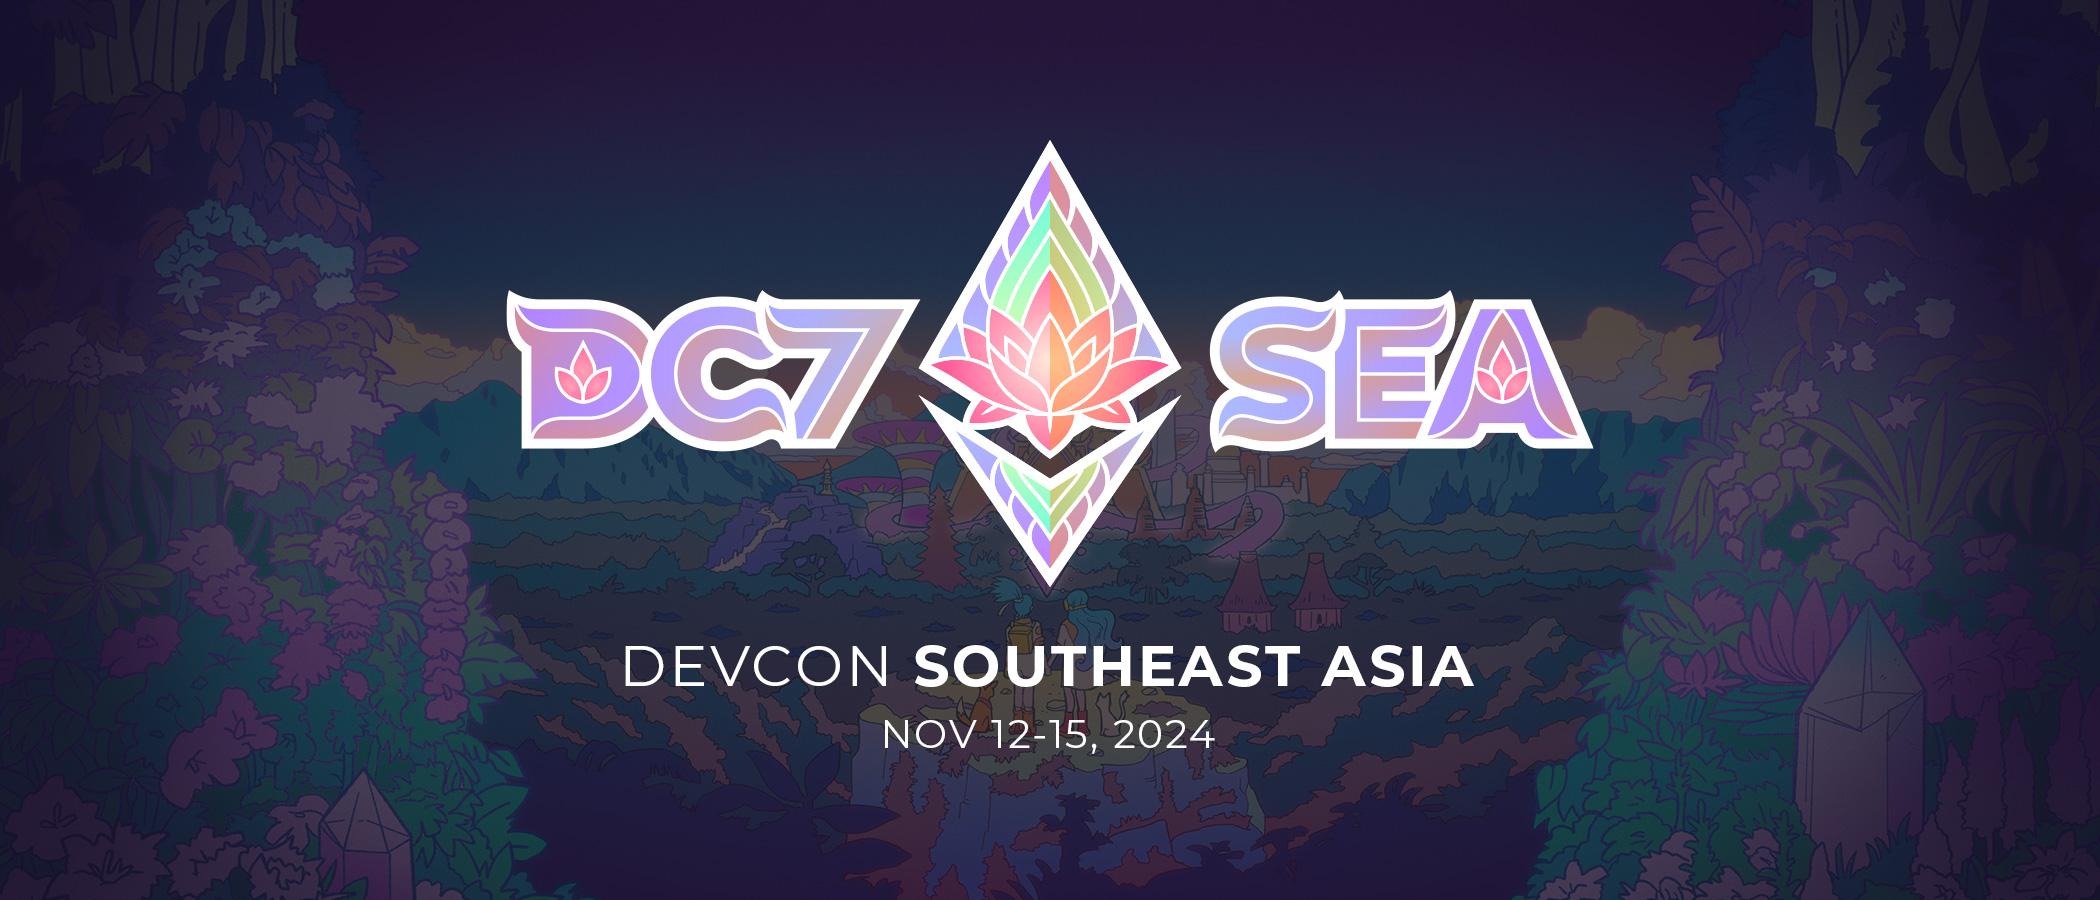 Southeast Asia welcomes Devcon 7!